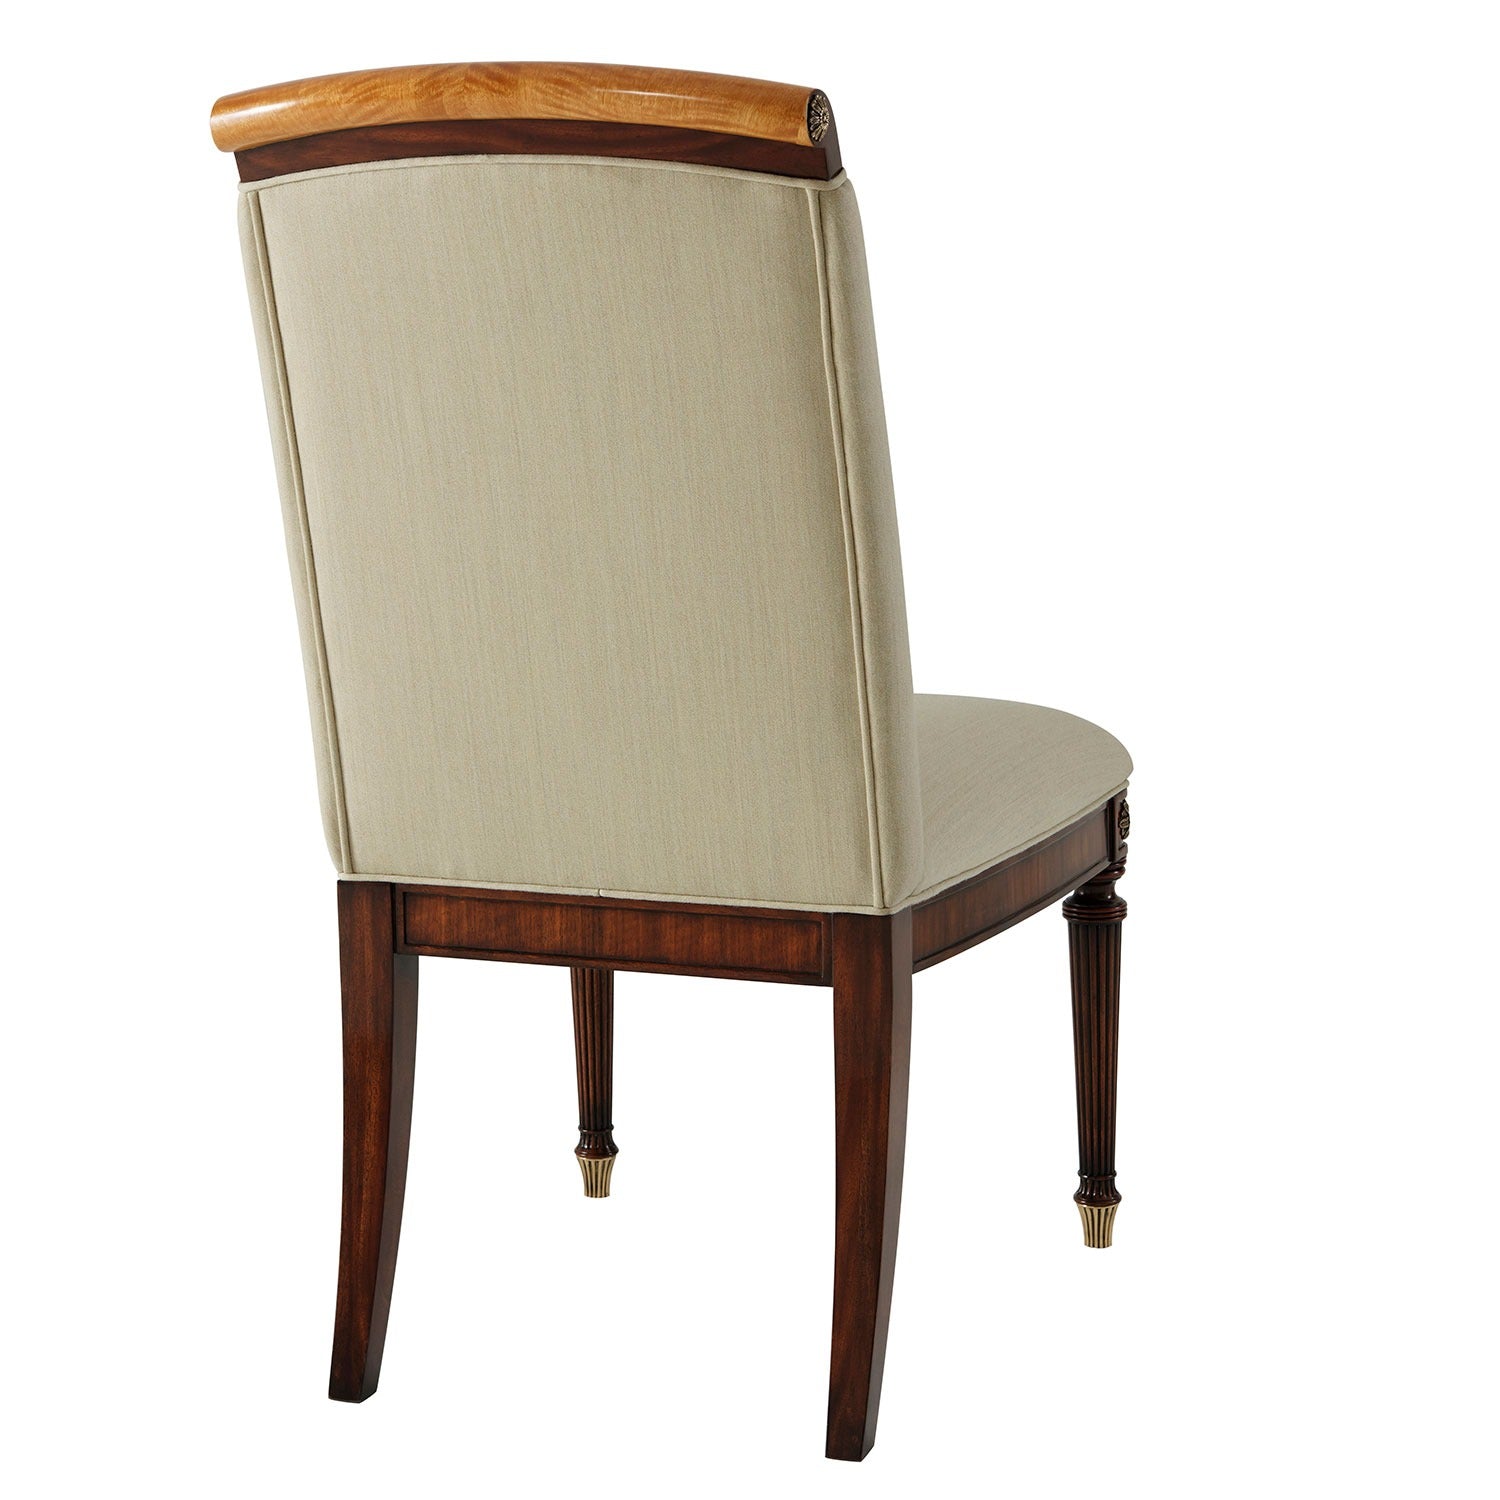 Upholstered Side Chair with Floral Brass Inlay